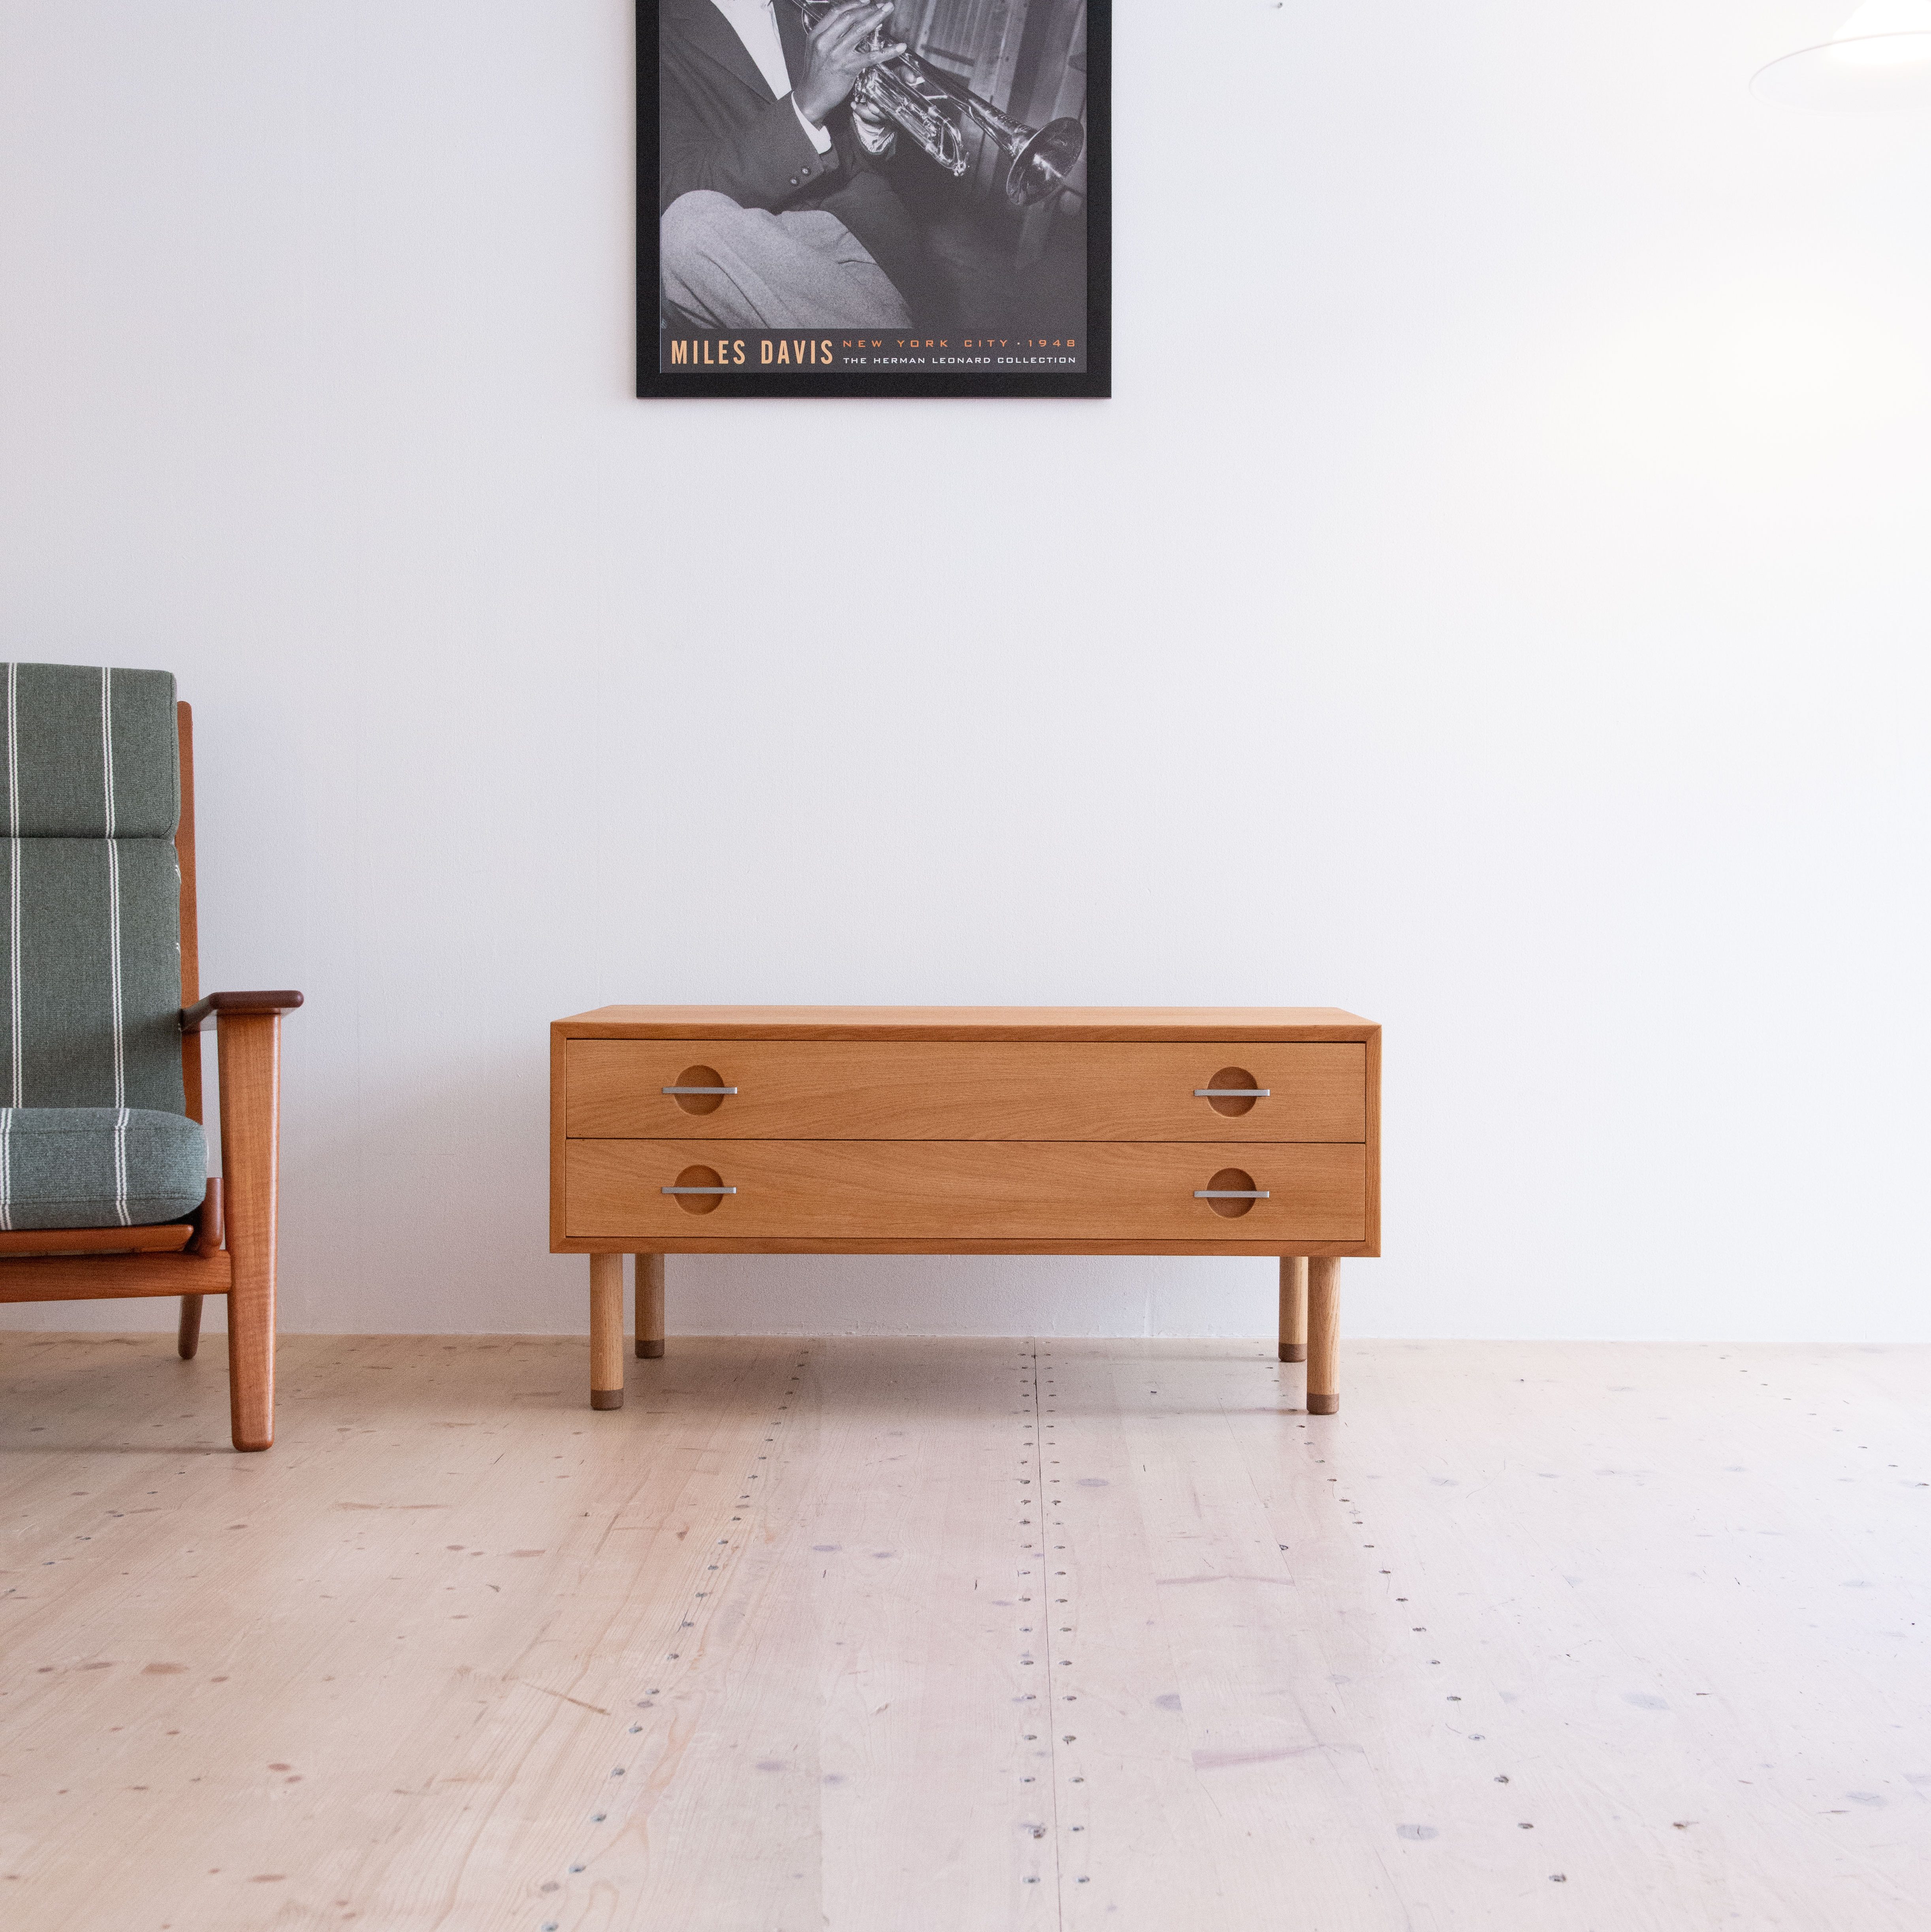 Oak Chest of Drawers by Hans J. Wegner for Ry Möbler. Produced in Denmark in the 1960s. Available at heyday möbel, Grubenstrasse 19, 8045 Zürich, Switzerland.